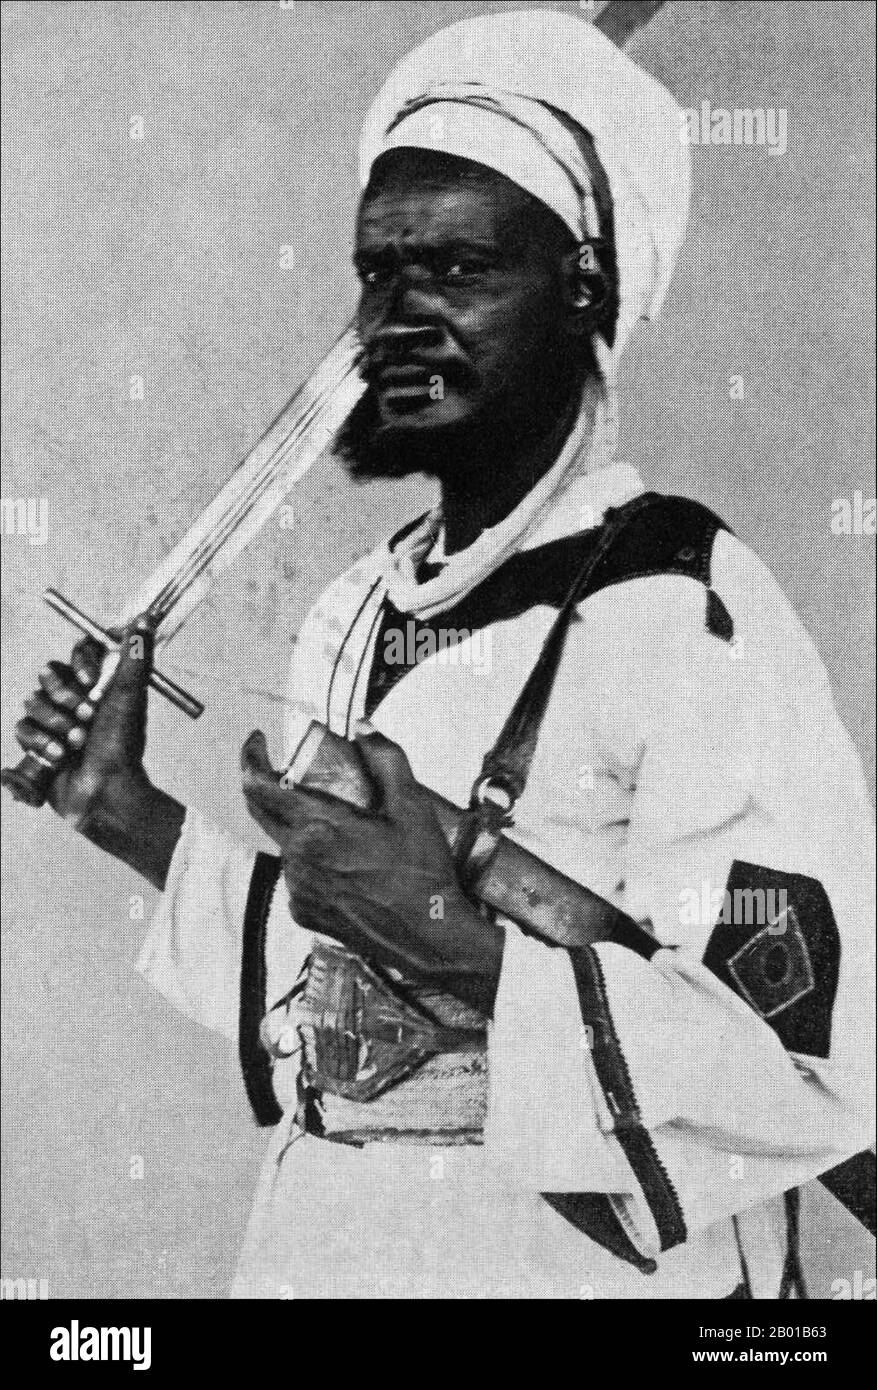 Sudan: A Mahdist warrior, early 20th century.  Muhammad Ahmad bin Abd Allah (12 August 1844 - 22 June 1885) was a religious leader of the Samaniyya order in Sudan who, on June 29, 1881, proclaimed himself as the Mahdi or messianic redeemer of the Islamic faith. His proclamation came during a period of widespread resentment among the Sudanese population of the oppressive policies of the Turco-Egyptian rulers, and capitalised on the messianic beliefs popular among the various Sudanese religious sects of the time. Stock Photo